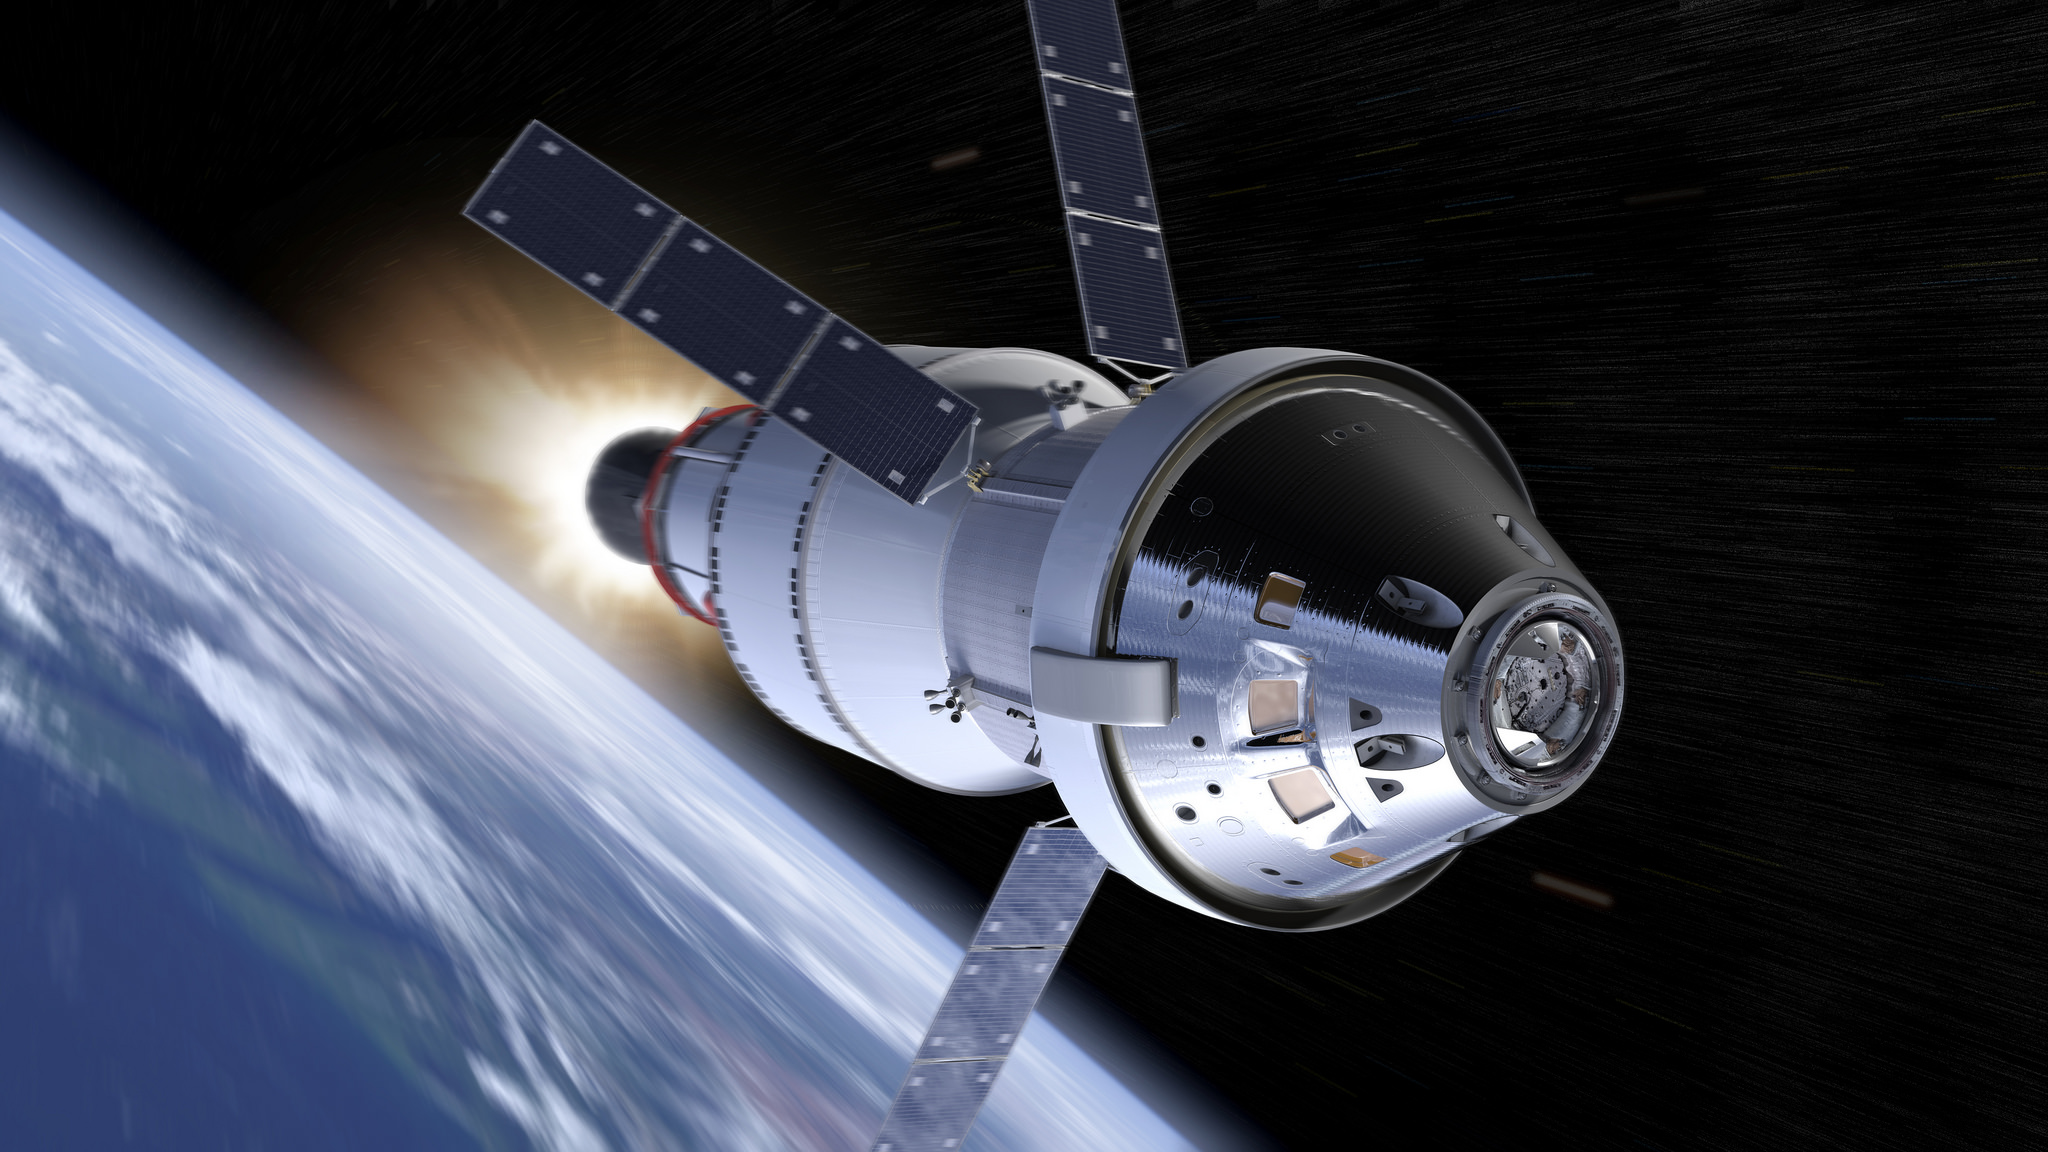 Artist conception of NASA's Orion spacecraft over Earth.